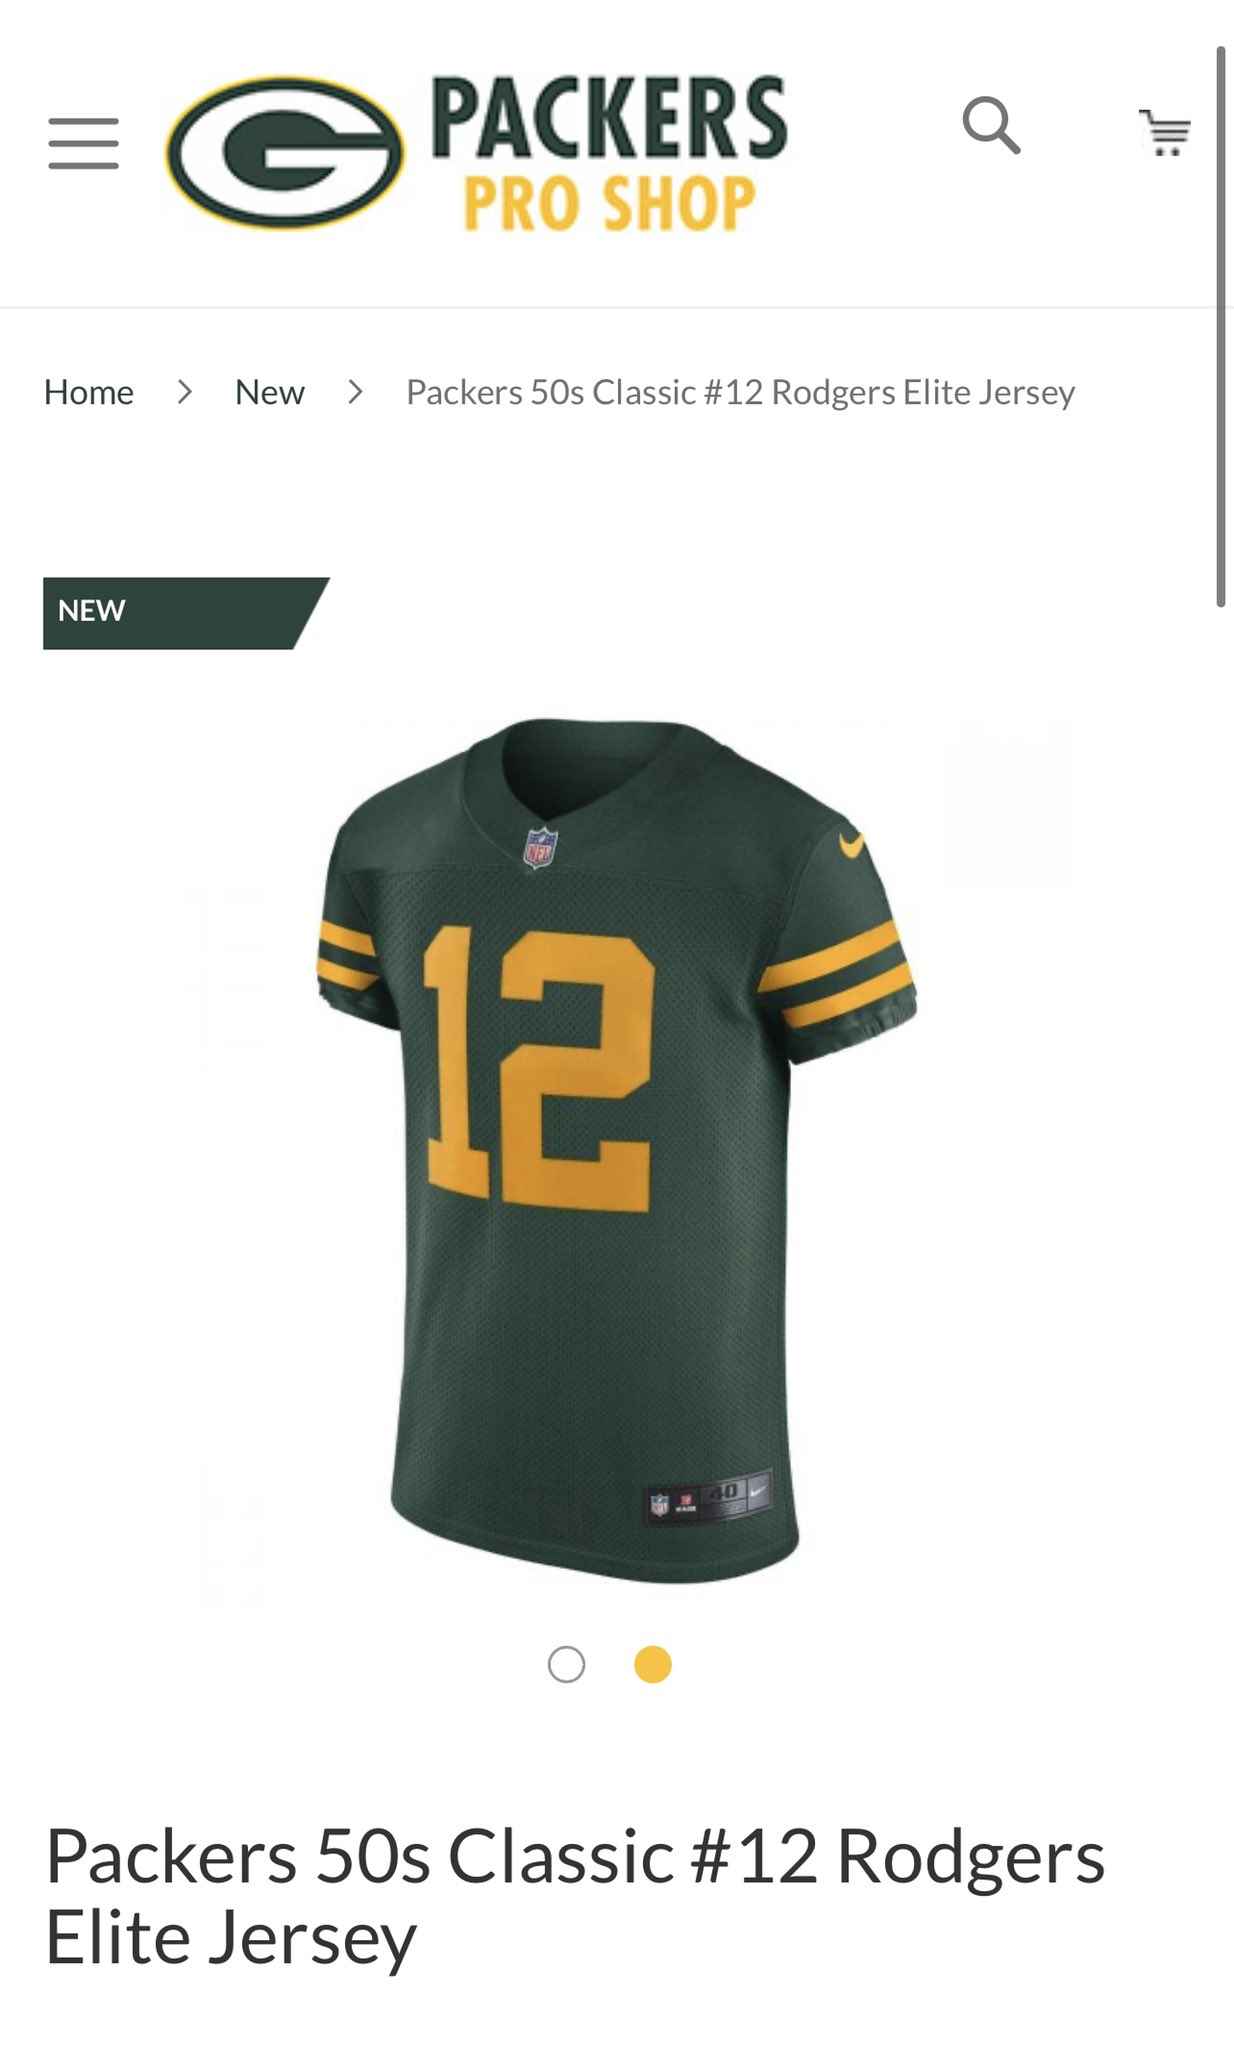 Kyle Malzhan on Twitter: 'The #Packers seemed to release their new  alternate jersey early. From their Pro Shop website, here are the 50's classic  jerseys:  / X